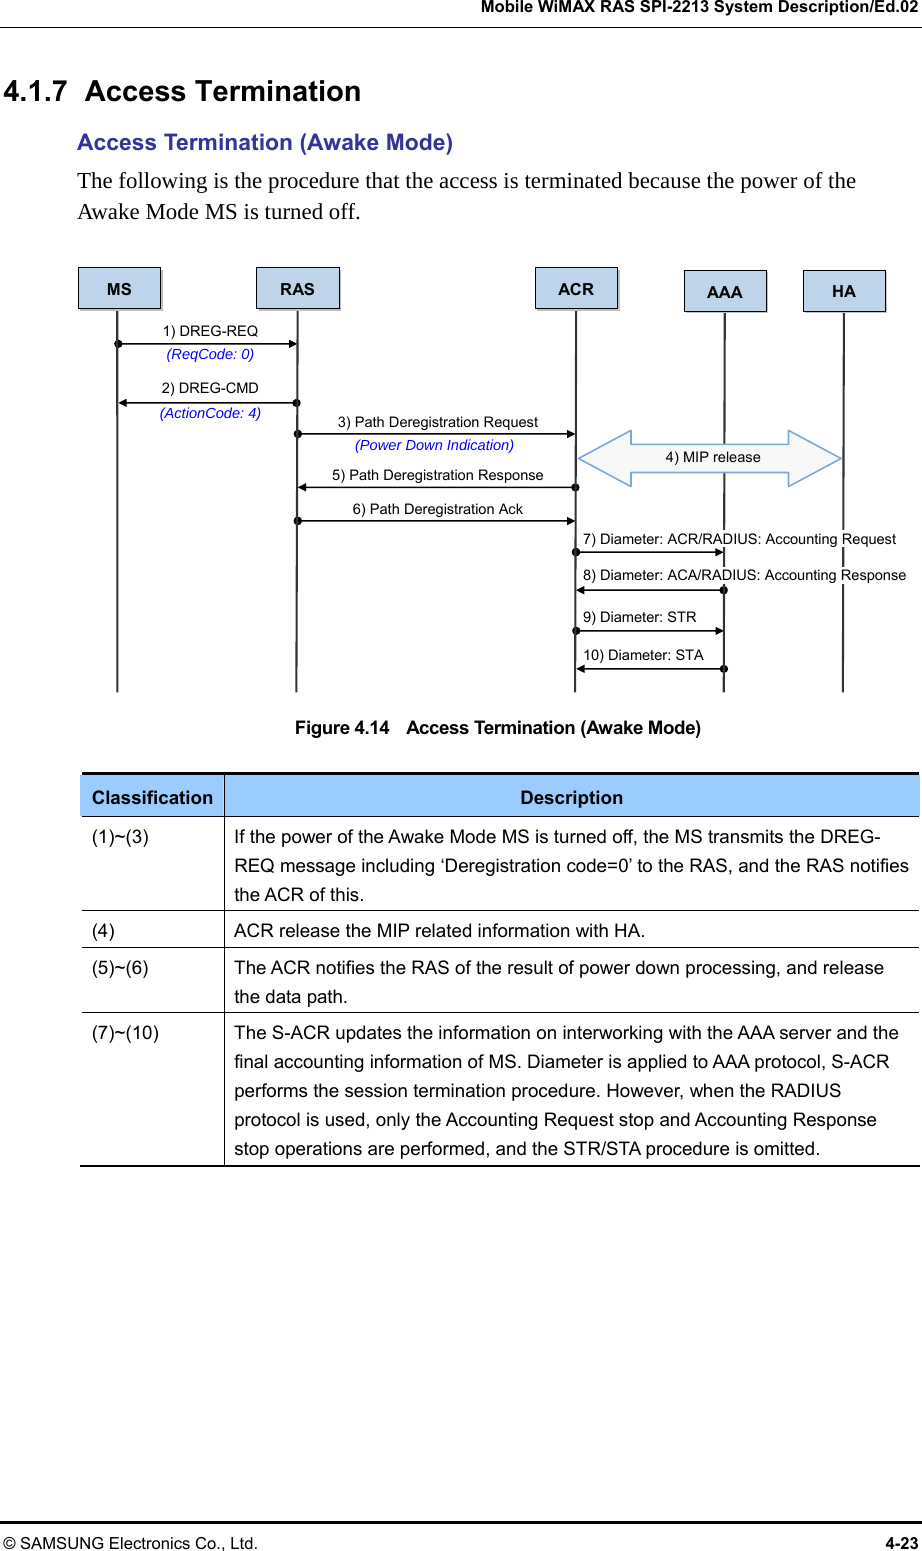   Mobile WiMAX RAS SPI-2213 System Description/Ed.02 © SAMSUNG Electronics Co., Ltd.  4-23 4.1.7 Access Termination Access Termination (Awake Mode) The following is the procedure that the access is terminated because the power of the Awake Mode MS is turned off.    Figure 4.14    Access Termination (Awake Mode)  Classification  Description (1)~(3)  If the power of the Awake Mode MS is turned off, the MS transmits the DREG-REQ message including ‘Deregistration code=0’ to the RAS, and the RAS notifies the ACR of this. (4)  ACR release the MIP related information with HA. (5)~(6)  The ACR notifies the RAS of the result of power down processing, and release the data path. (7)~(10)  The S-ACR updates the information on interworking with the AAA server and the final accounting information of MS. Diameter is applied to AAA protocol, S-ACR performs the session termination procedure. However, when the RADIUS protocol is used, only the Accounting Request stop and Accounting Response stop operations are performed, and the STR/STA procedure is omitted.  1) DREG-REQ (ReqCode: 0) 3) Path Deregistration Request 2) DREG-CMD (ActionCode: 4) (Power Down Indication) 5) Path Deregistration Response 6) Path Deregistration Ack 9) Diameter: STR 10) Diameter: STA 4) MIP release 7) Diameter: ACR/RADIUS: Accounting Request 8) Diameter: ACA/RADIUS: Accounting Response MS RAS  ACR AAA  HA